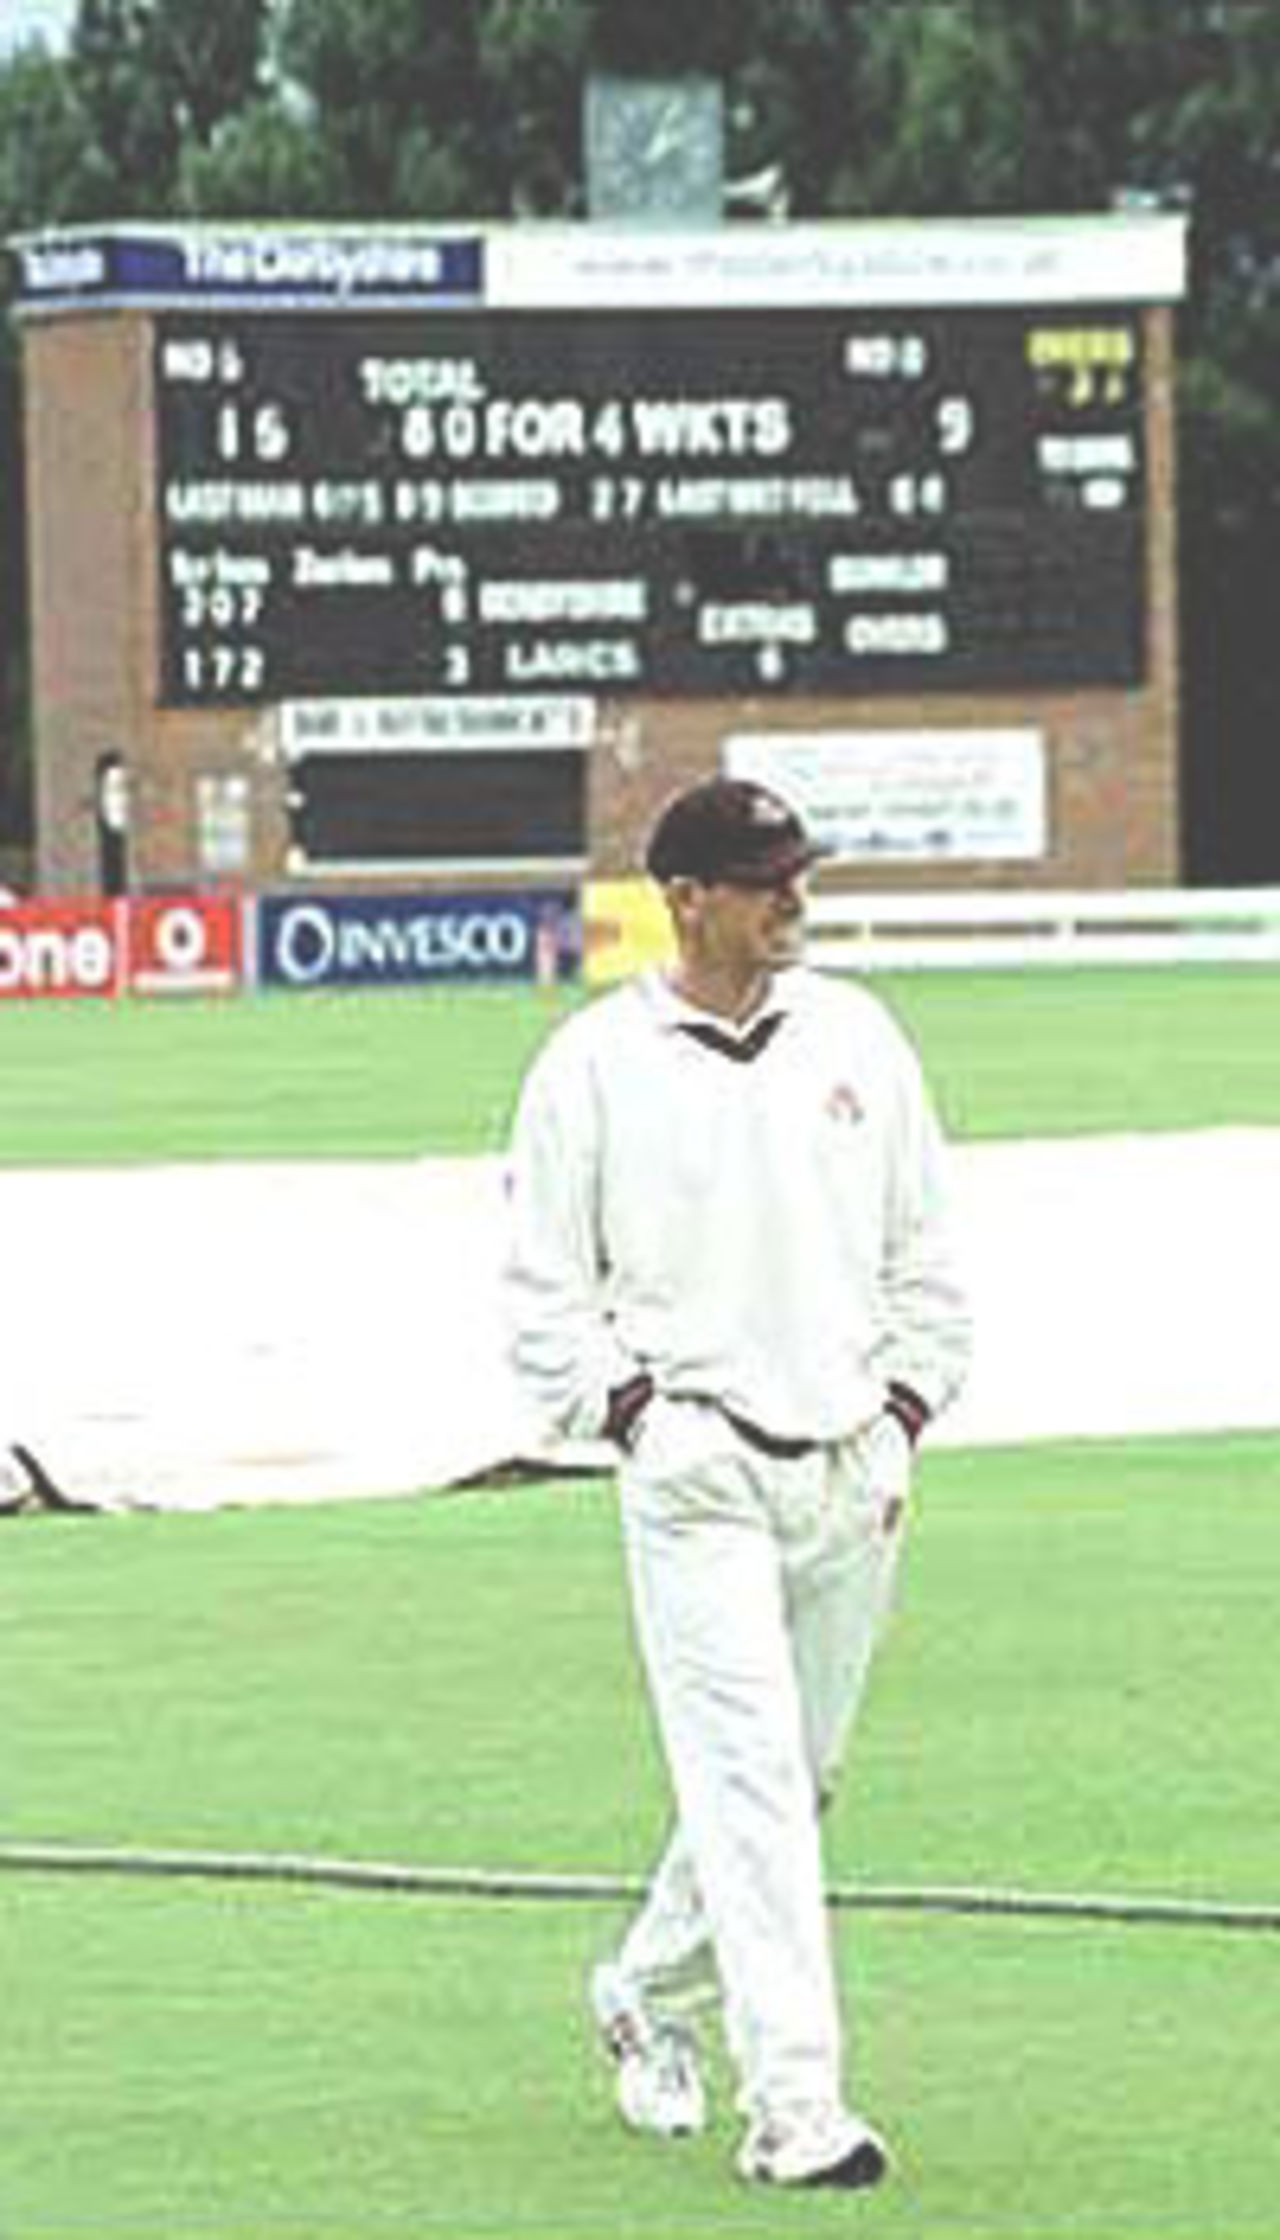 John Crawley leaves the field after the match was abandoned, PPP healthcare County Championship Division One, 2000, Derbyshire v Lancashire, County Ground, Derby, 07-10 July 2000 (Day 4).